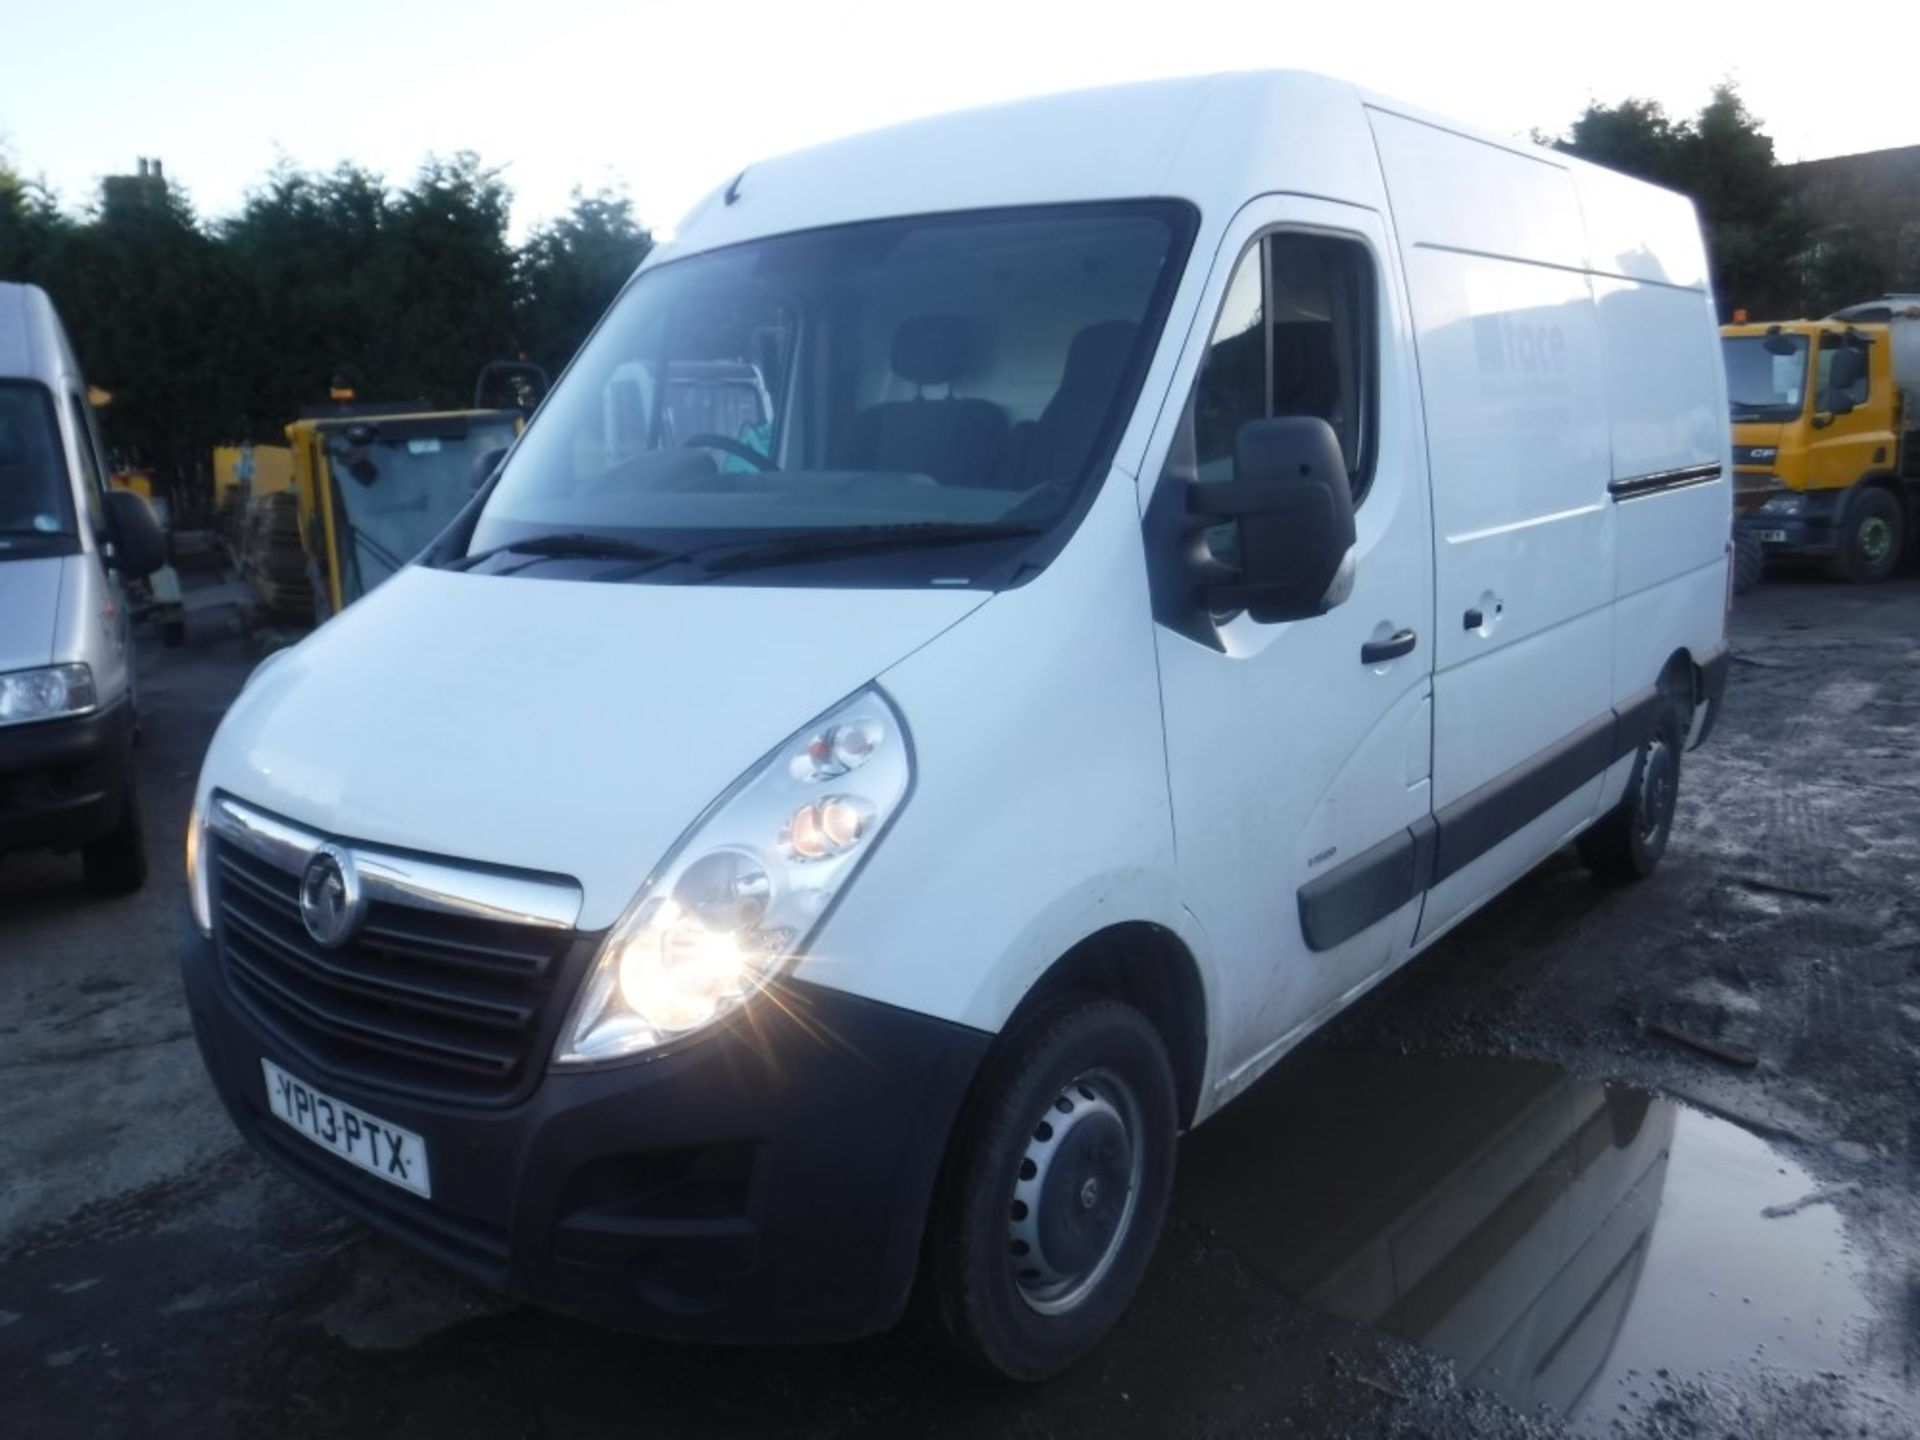 13 reg VAUXHALL MOVANO F3500 CDTI, 1ST REG 05/13, TEST 05/19, 106875M, V5 HERE, 1 OWNER FROM - Image 2 of 6